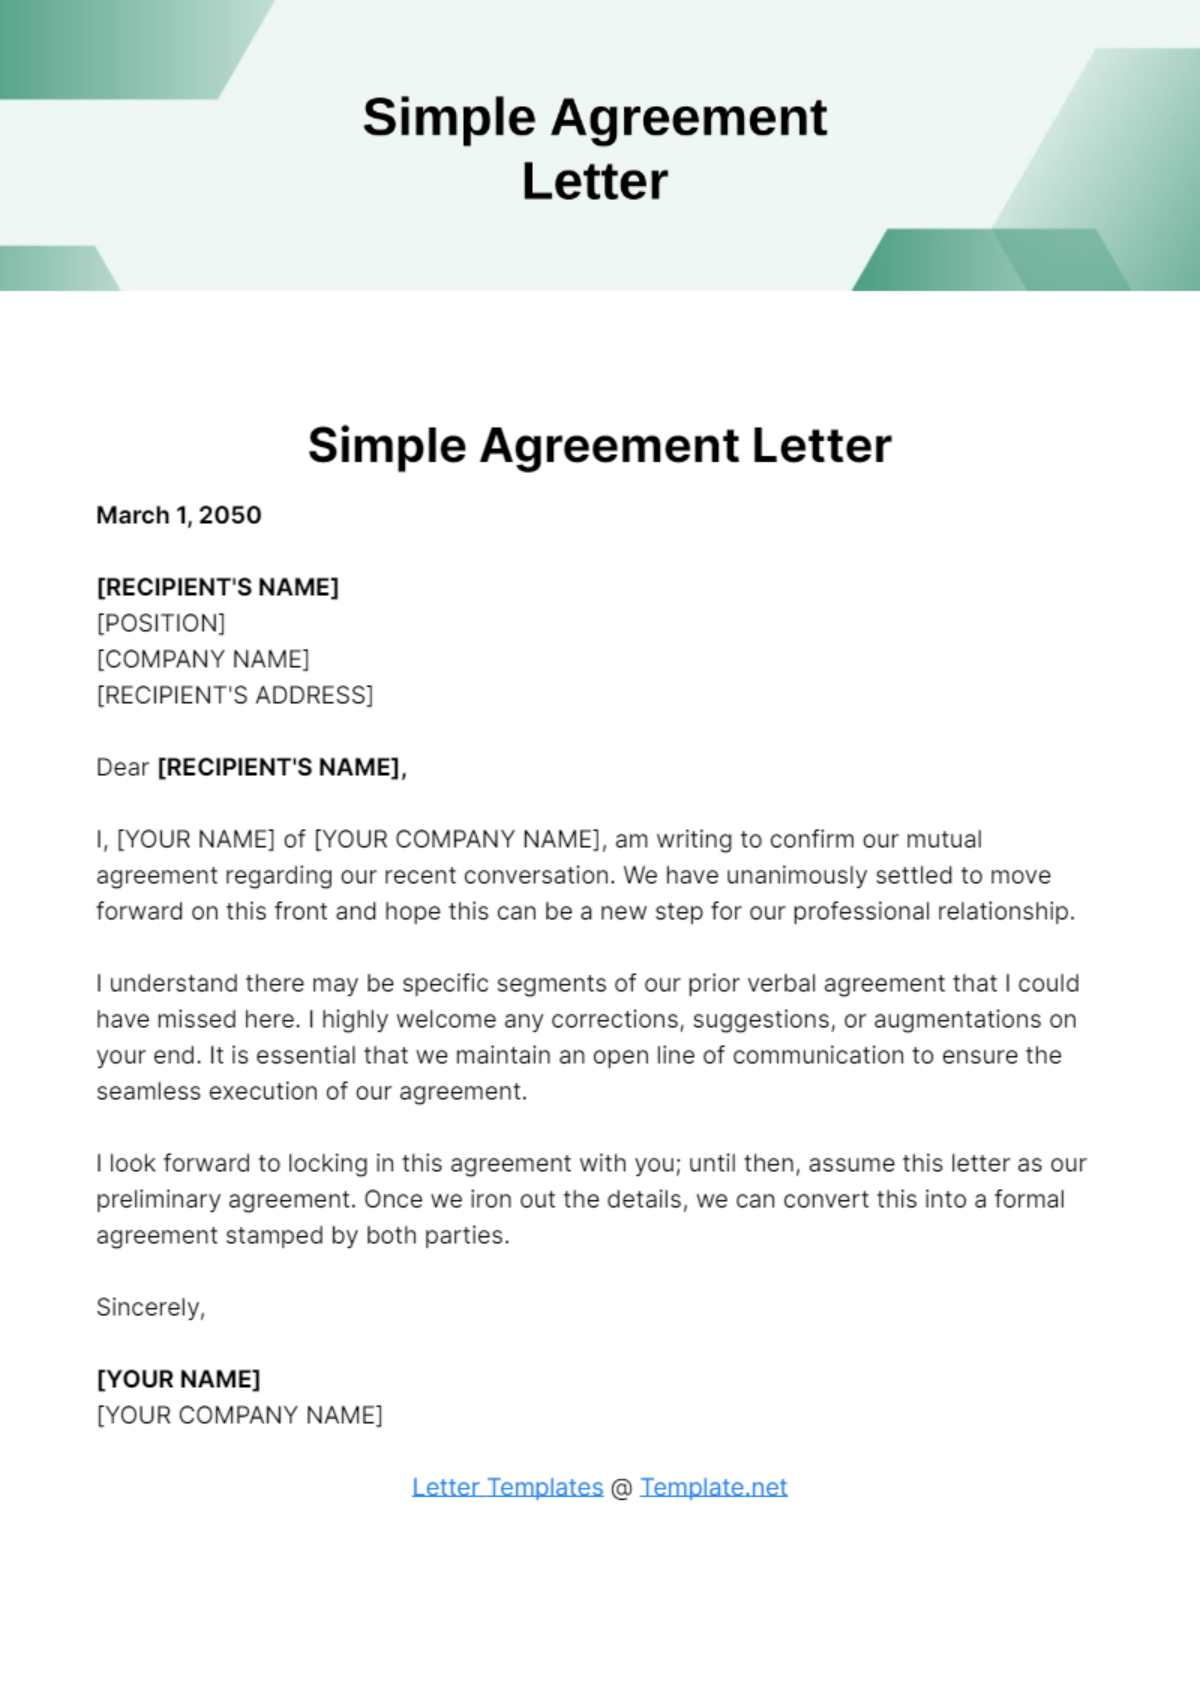 Simple Agreement Letter Template